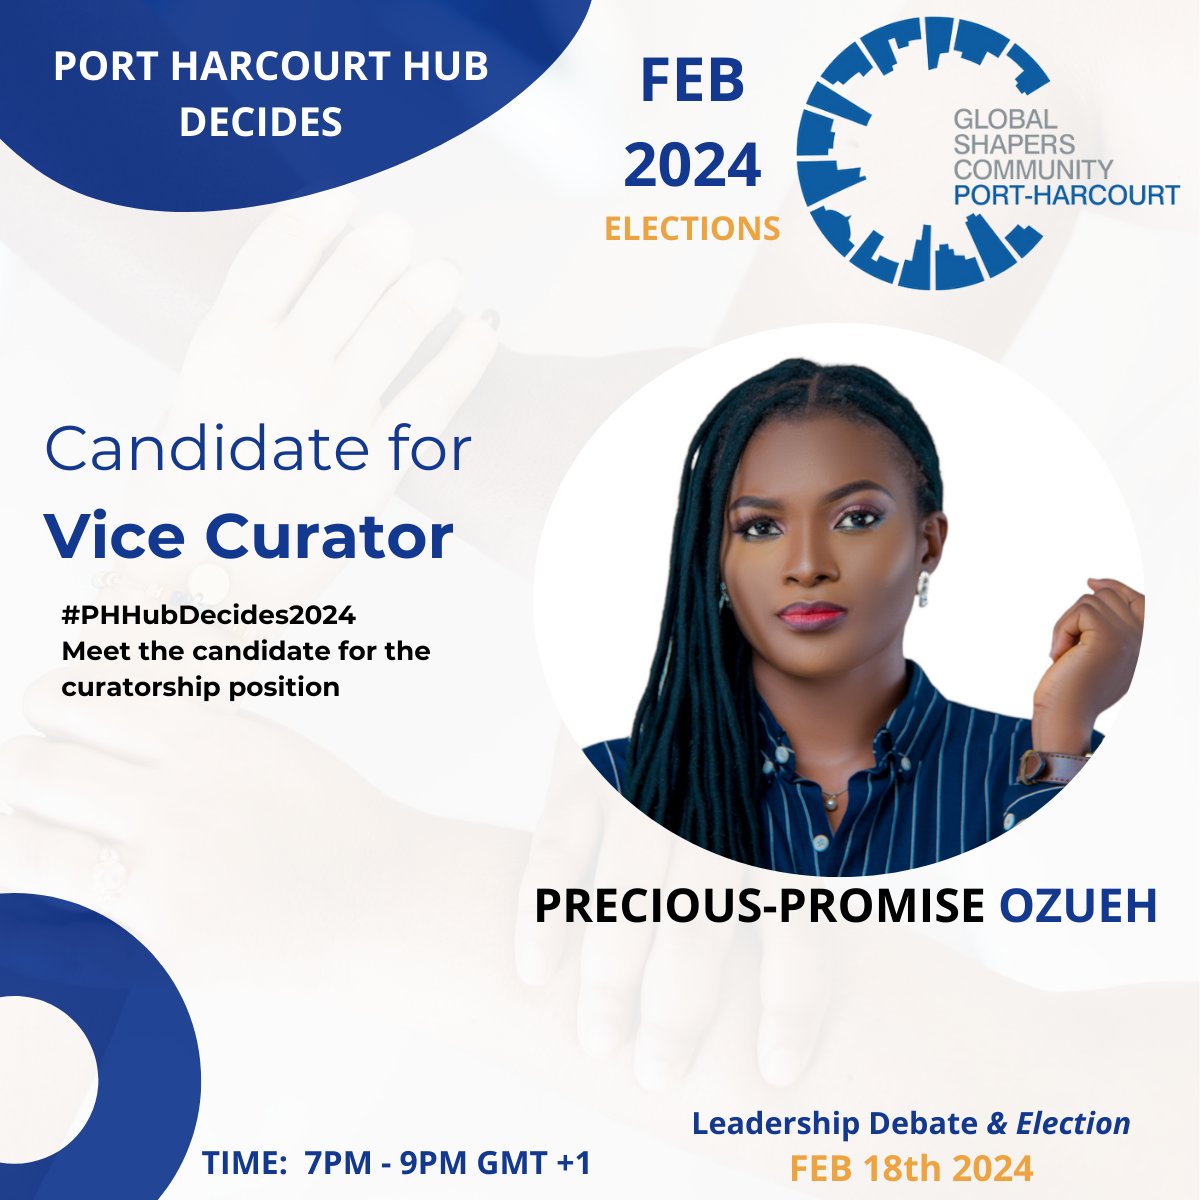 Port Harcourt Global Shapers Hub Election Alert! Date: Sunday, Feb. 18, 2024 We are gearing up for an exciting election, and we're thrilled to introduce our Vice Curator candidate: Precious-Promise Ozueh! 🎉 #portharcourthubdecides2024 #phglobalshapers #capacity #leadership